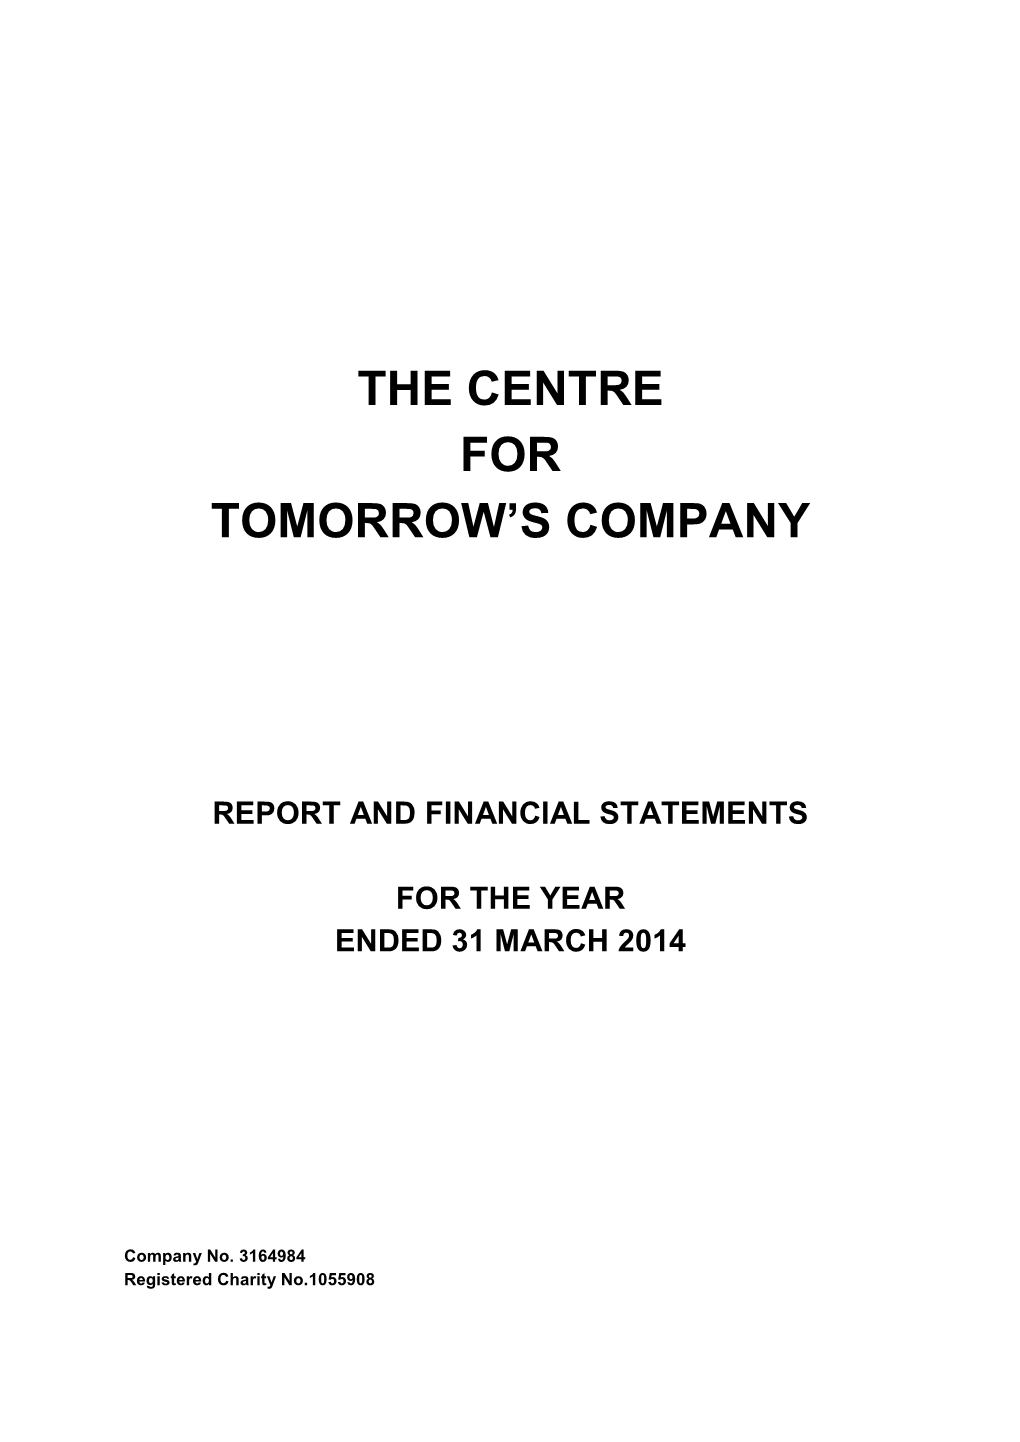 Report and Financial Statements for the Year Ended 31 March 2014